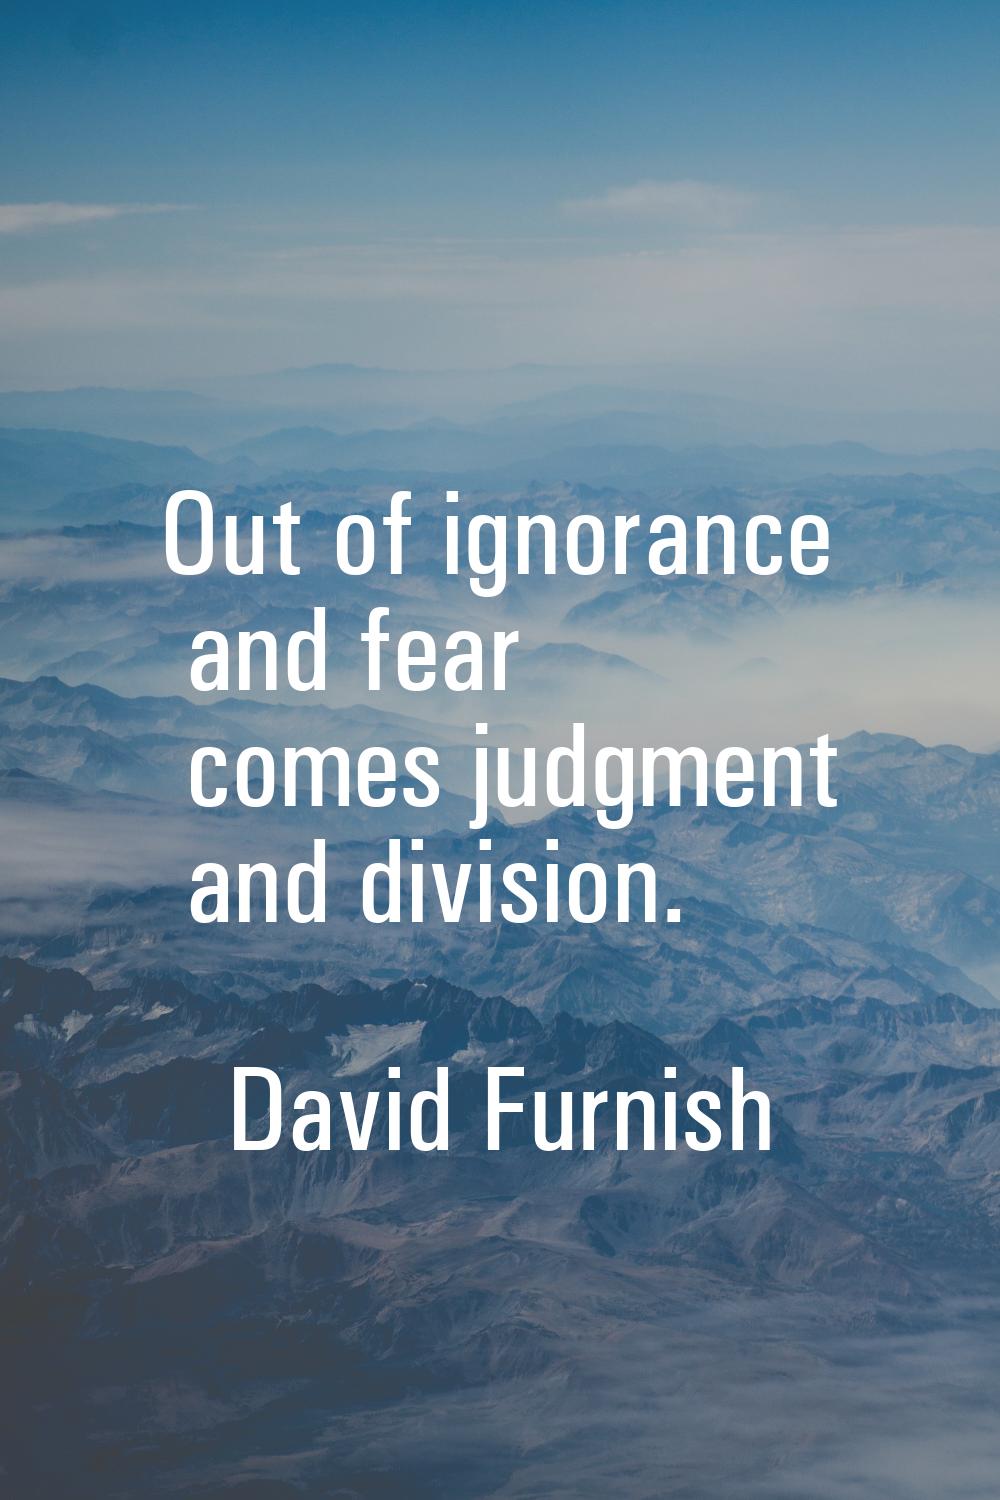 Out of ignorance and fear comes judgment and division.